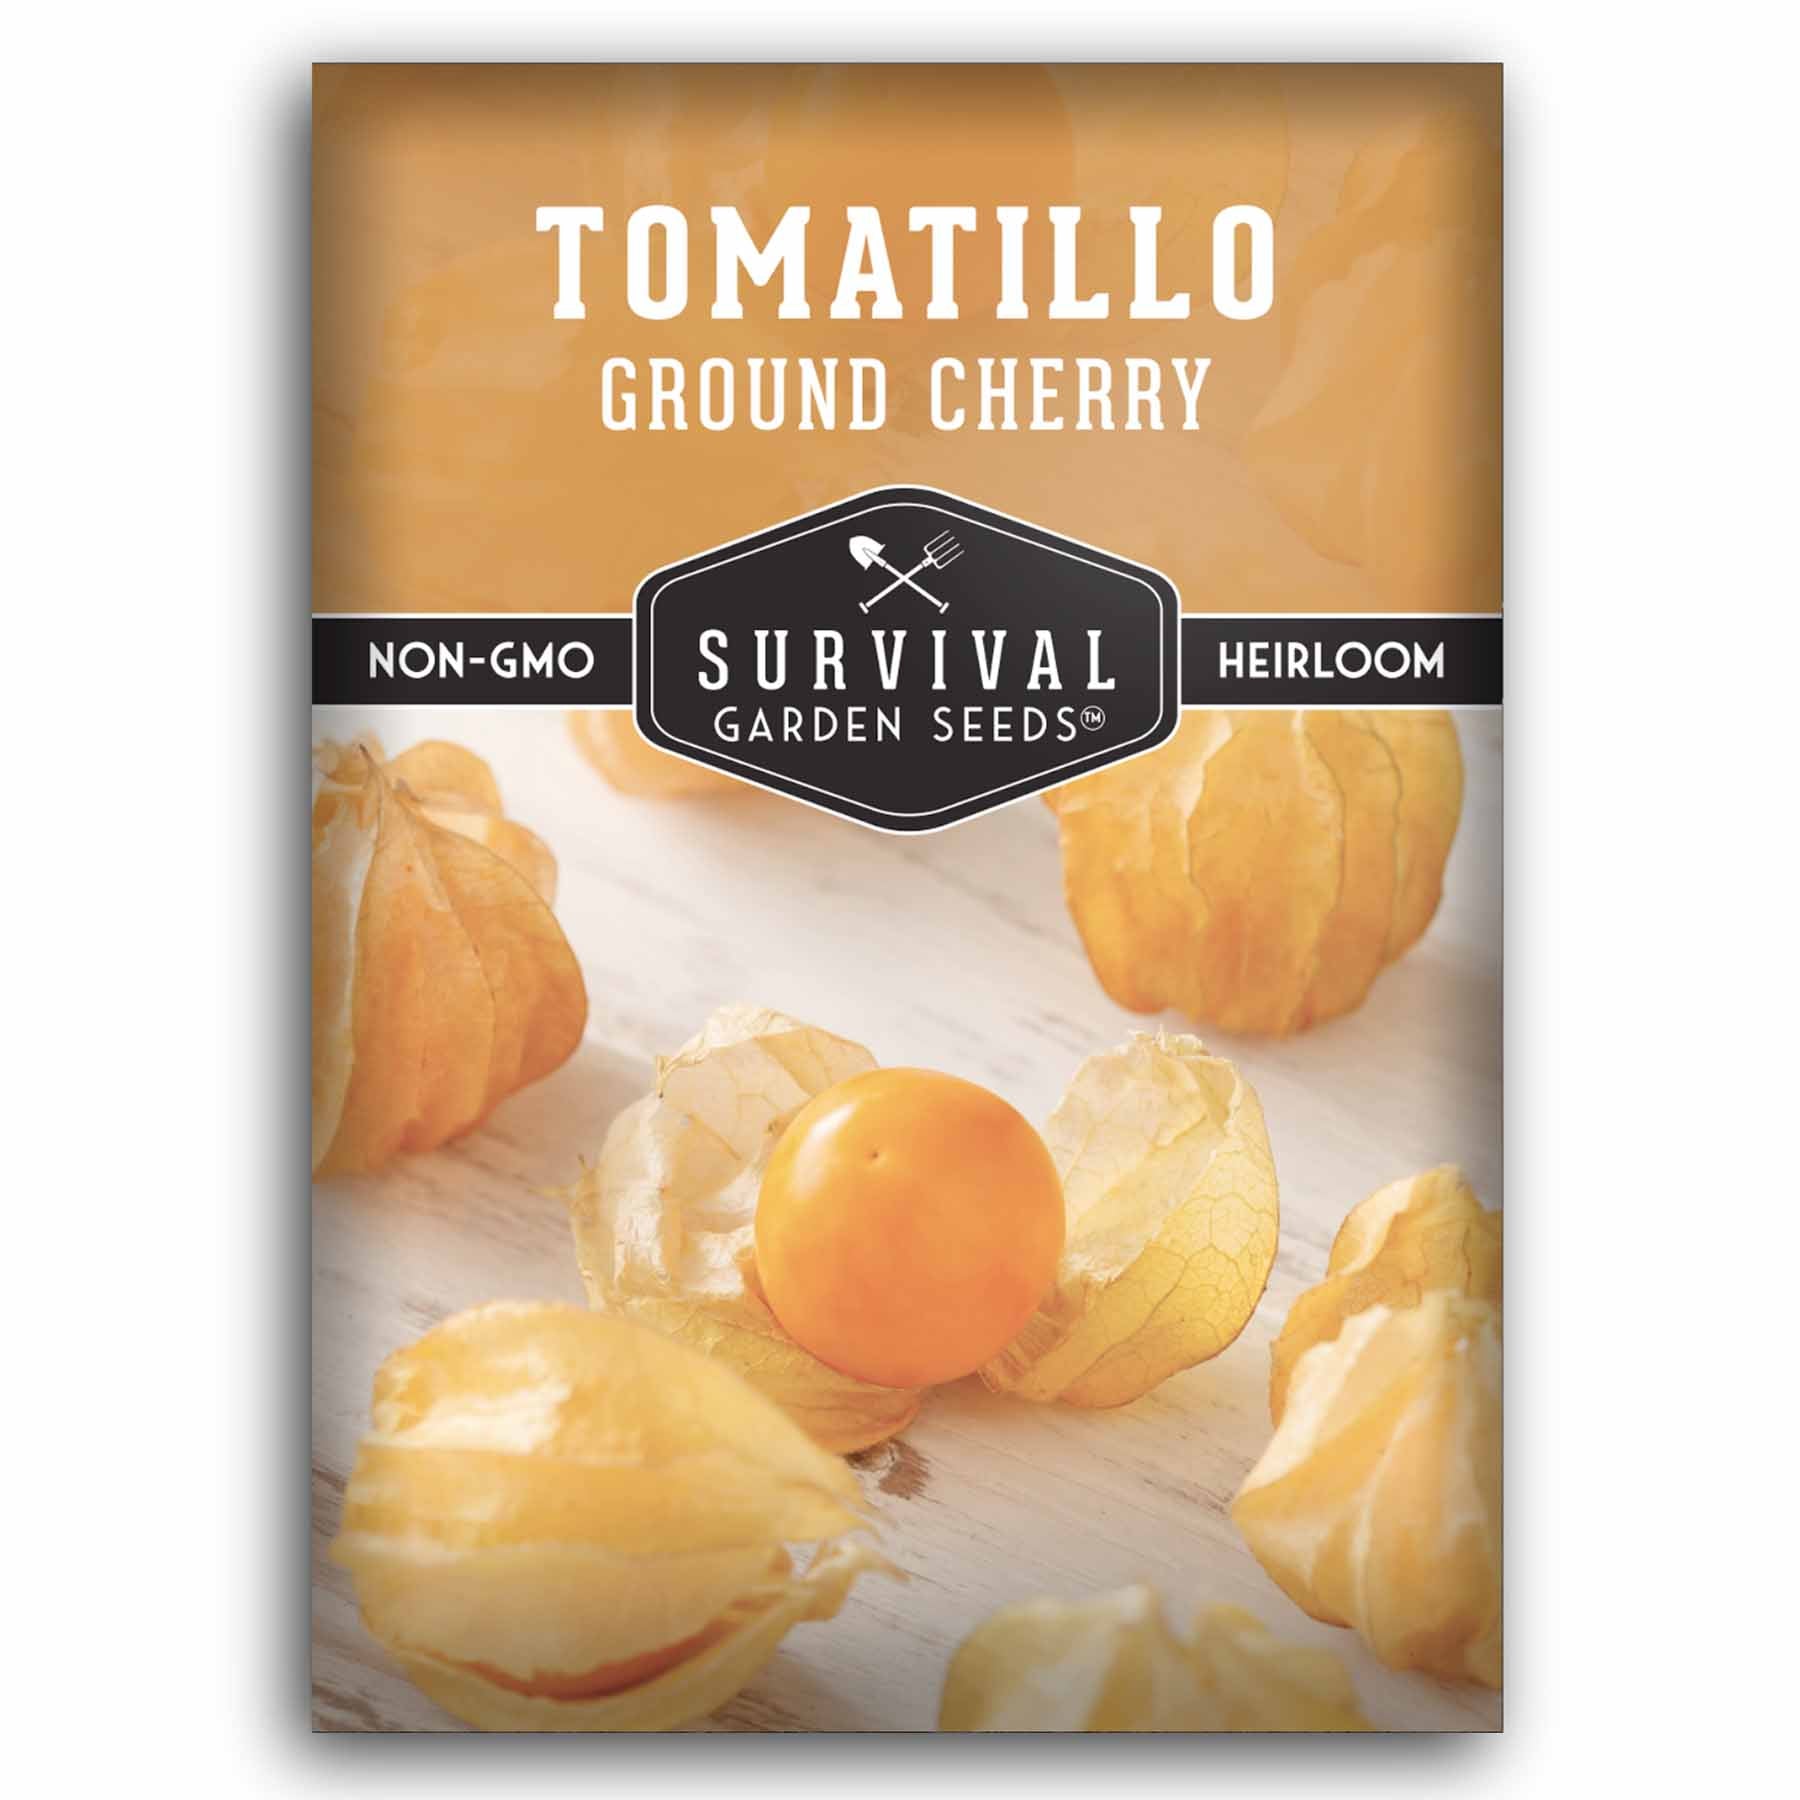 1 packet of Ground Cherry Tomatillo seeds